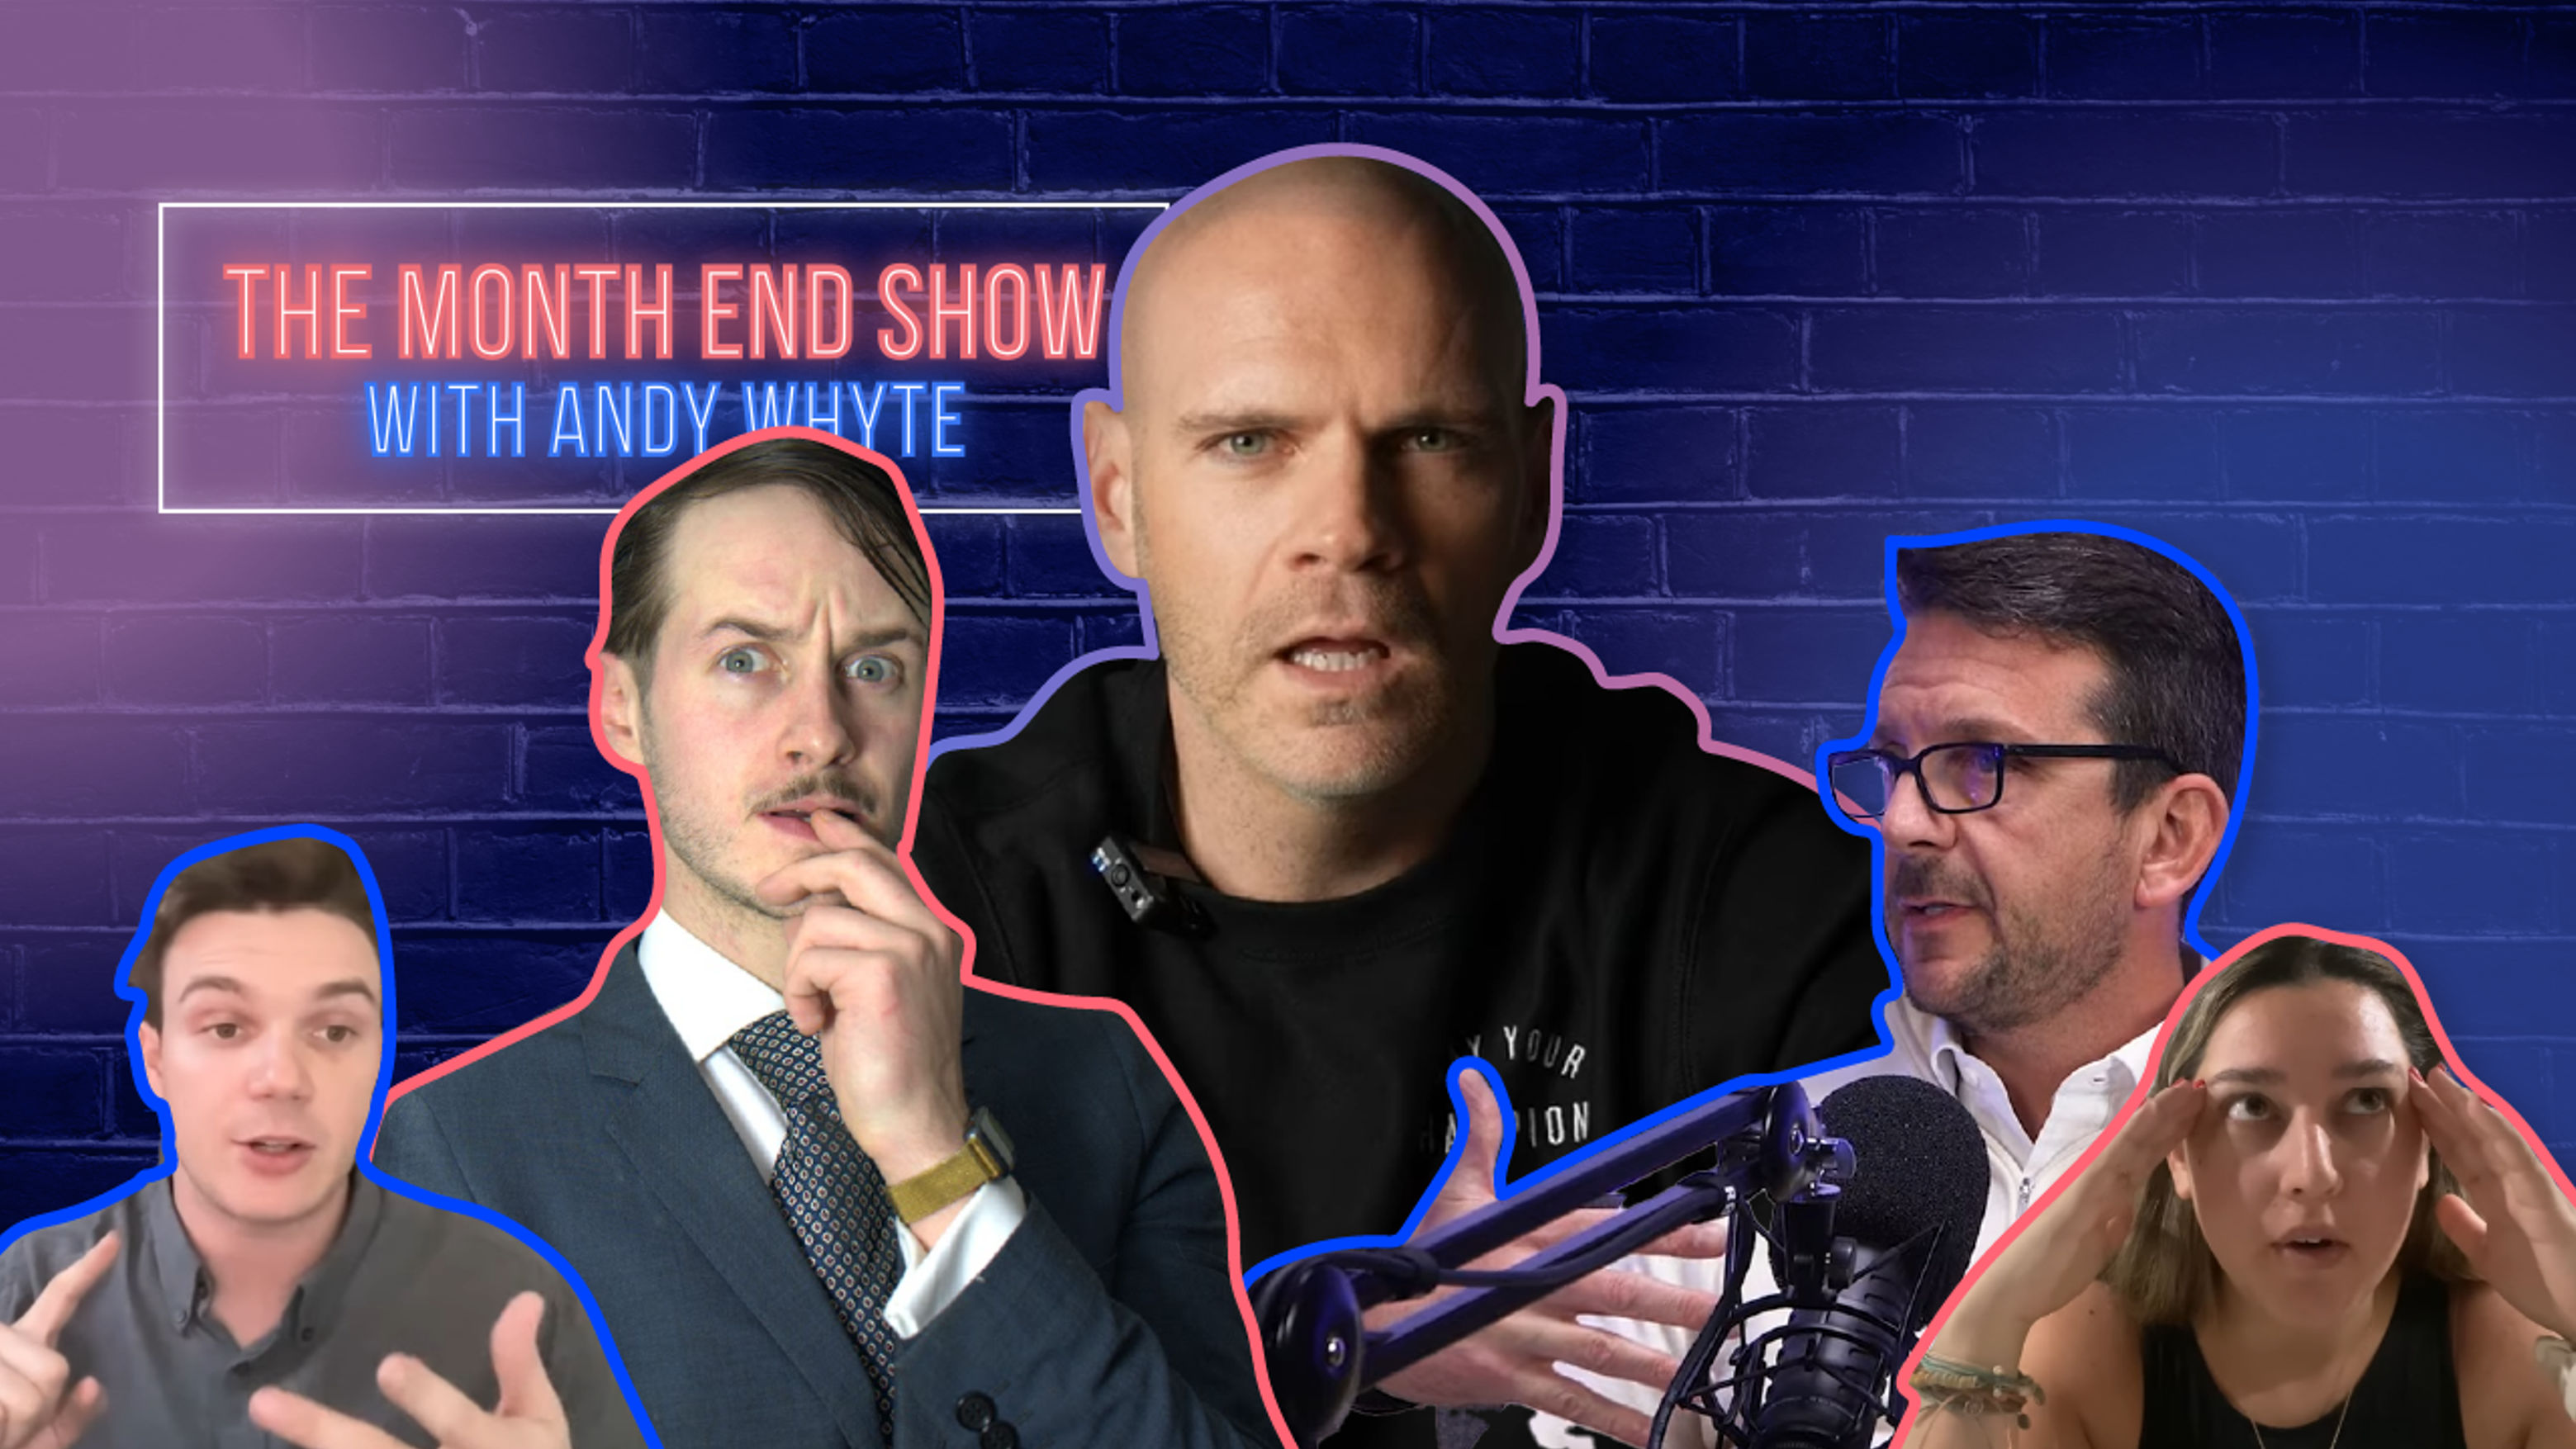 The Month End Show: November